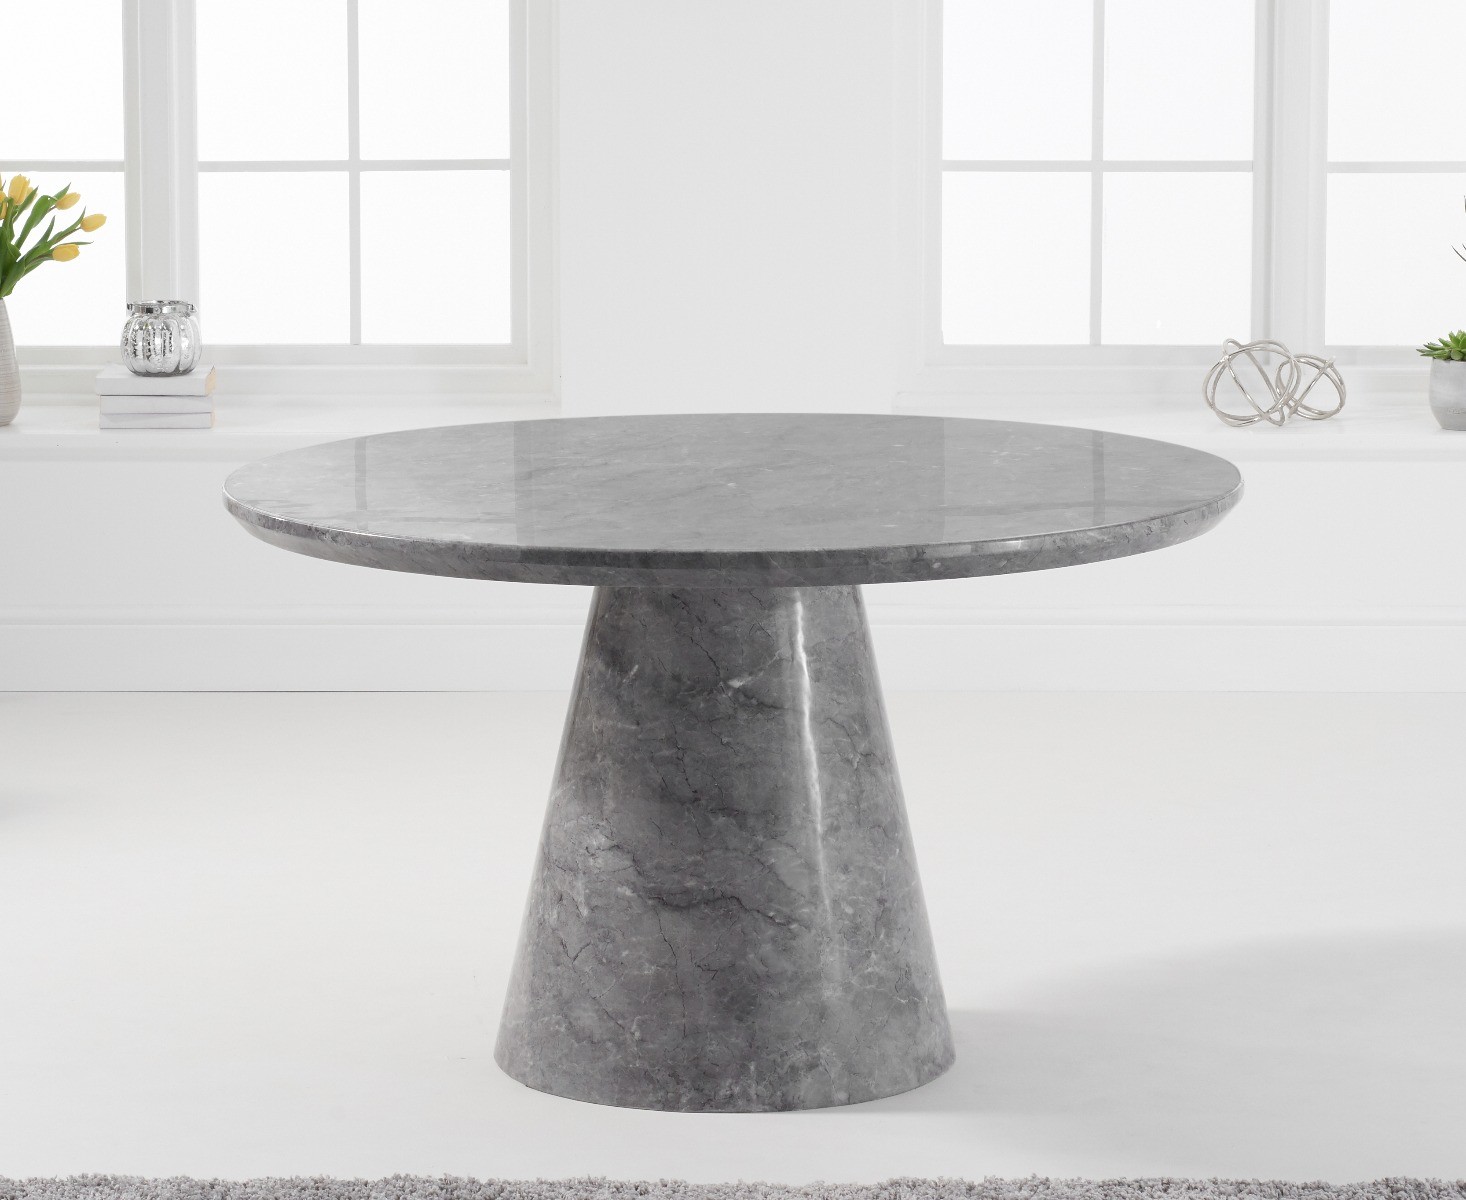 Photo 1 of Ravello 130cm round grey marble dining table with 4 white aldo chairs